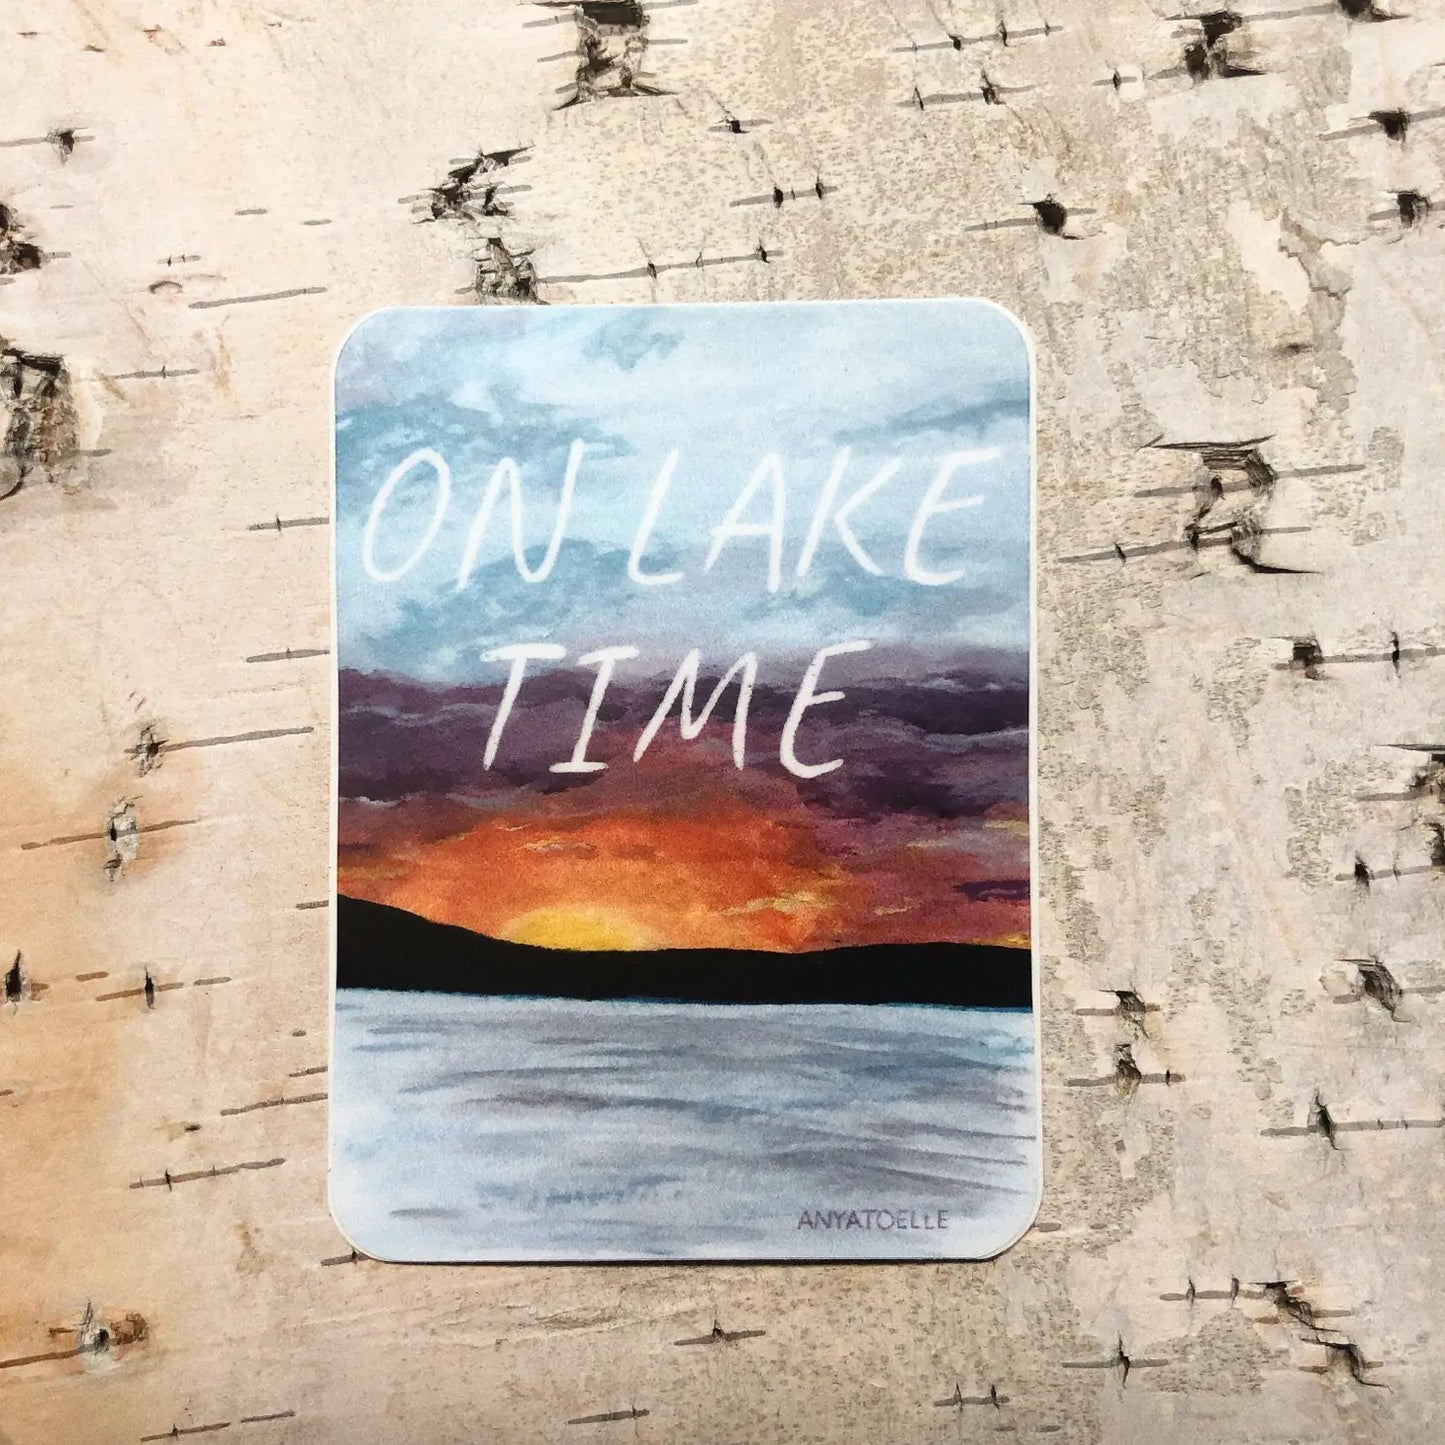 On Lake Time Sticker by Anya Toelle